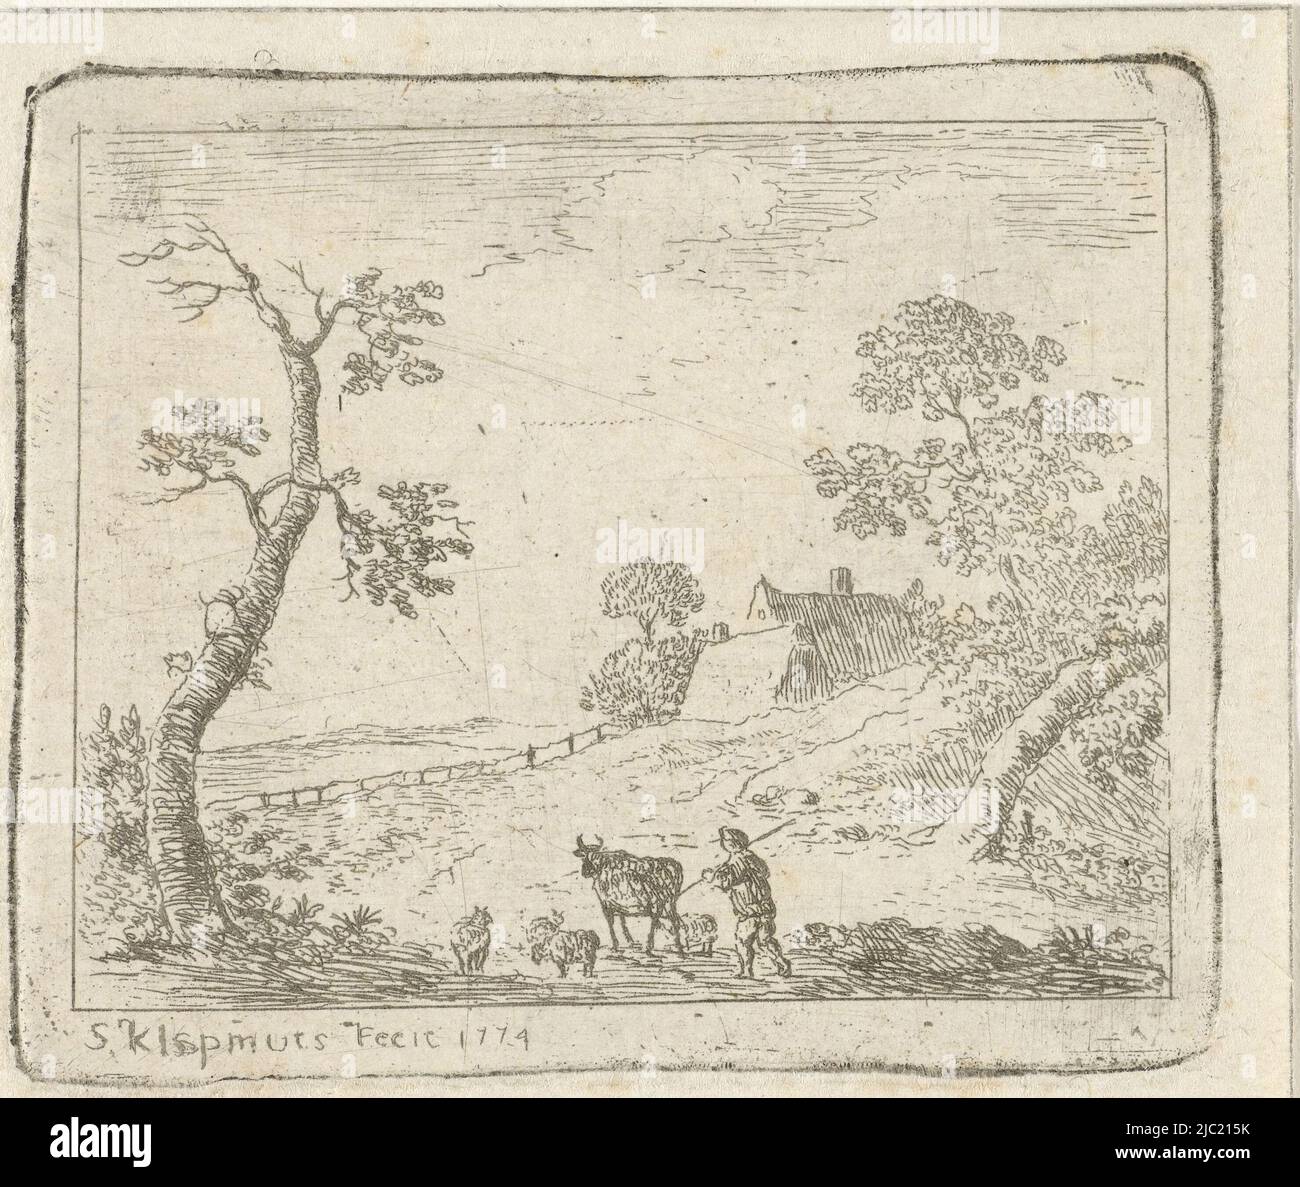 In a hilly landscape a shepherd drives his cattle. In the background two farmhouses and some trees, Landscape with a shepherd., print maker: Simon Klapmuts, (mentioned on object), Moordrecht, 1774, paper, etching, h 57 mm × w 68 mm Stock Photo